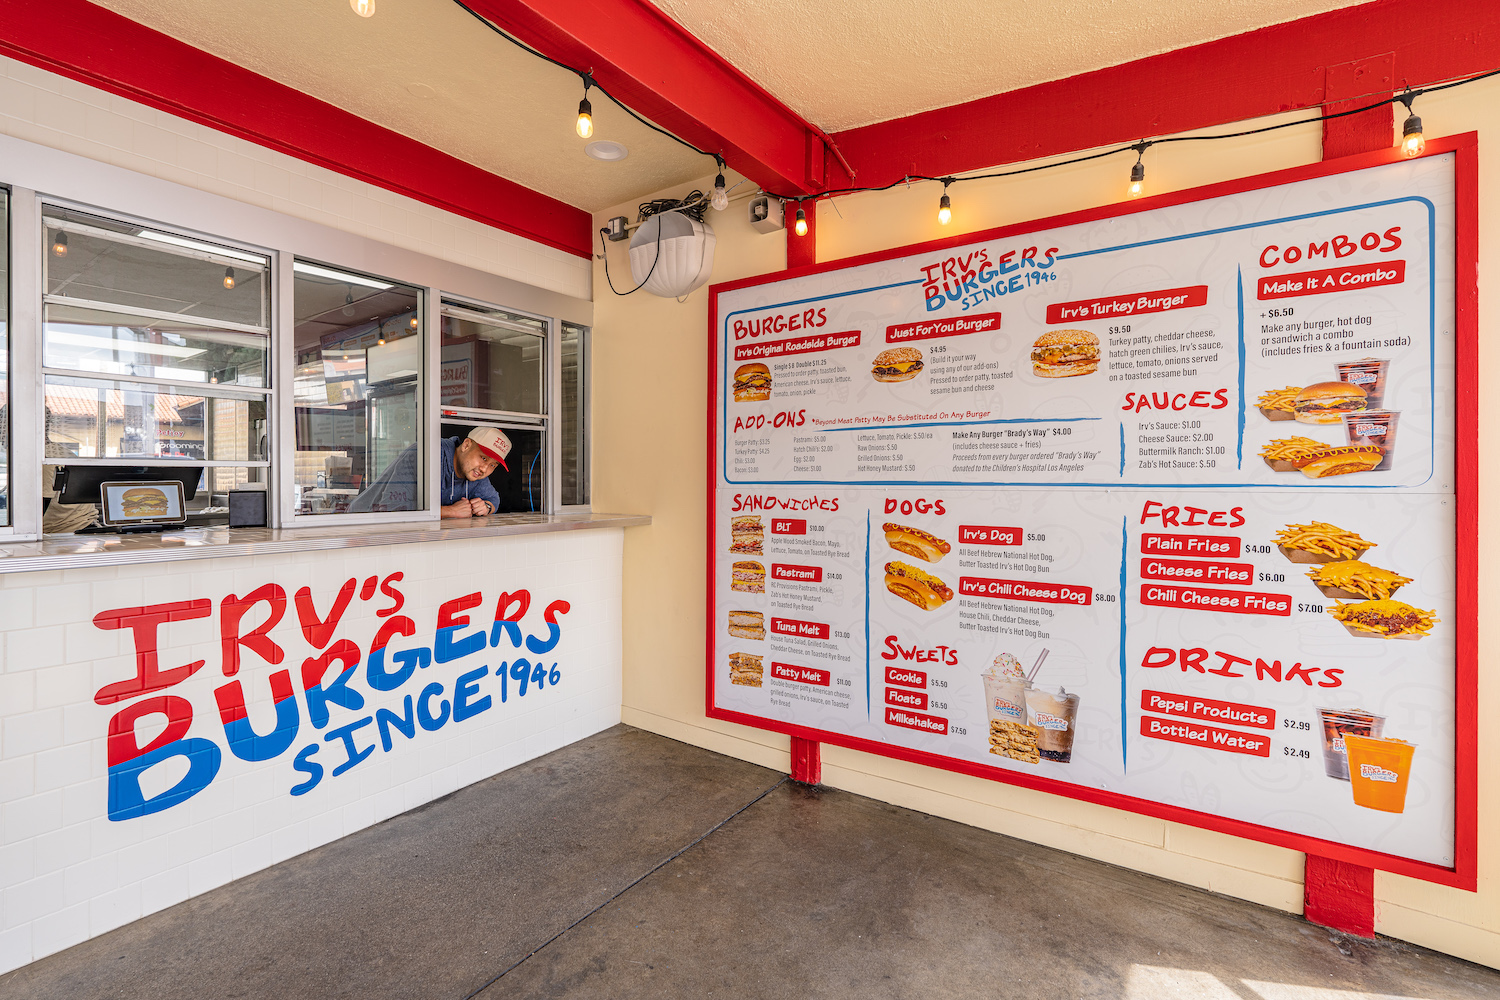 The Menu' and Irv's Burgers to Offer 'Just a Well-Made Cheeseburger